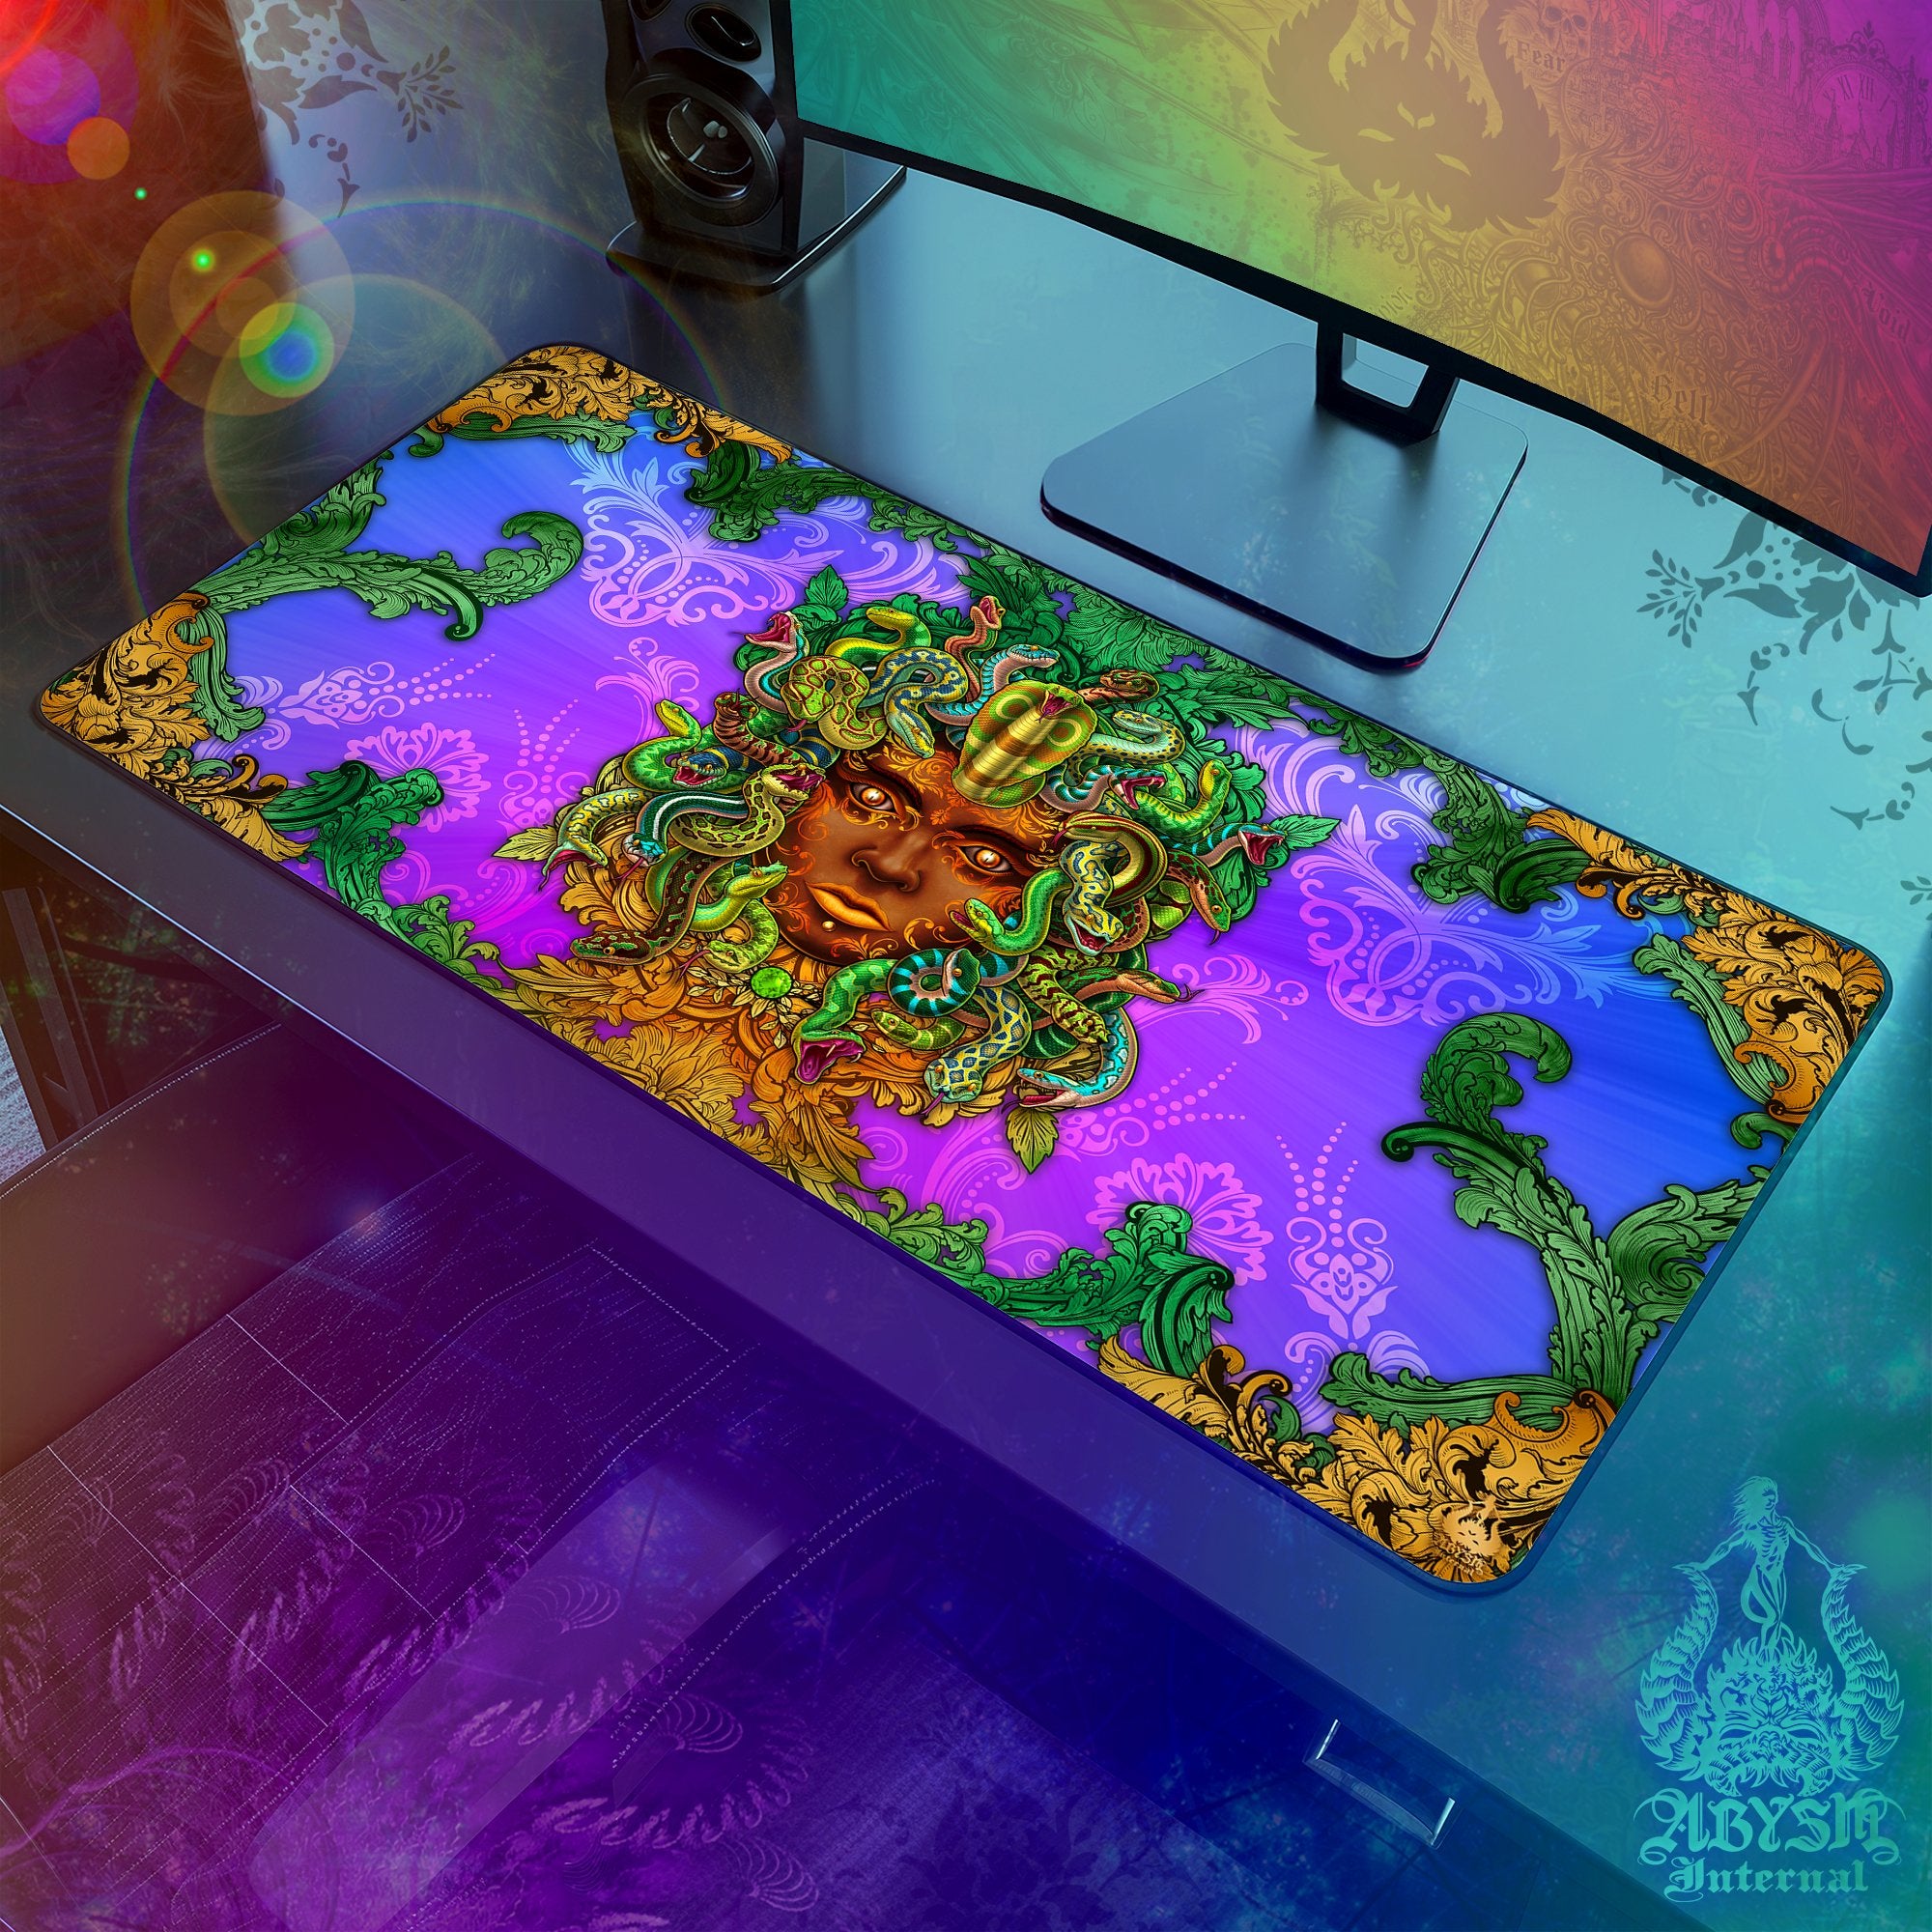 Fantasy Desk Mat, Medusa Gaming Mouse Pad, Gamer Table Protector Cover, Nature Workpad, Witchy Art Print - Abysm Internal